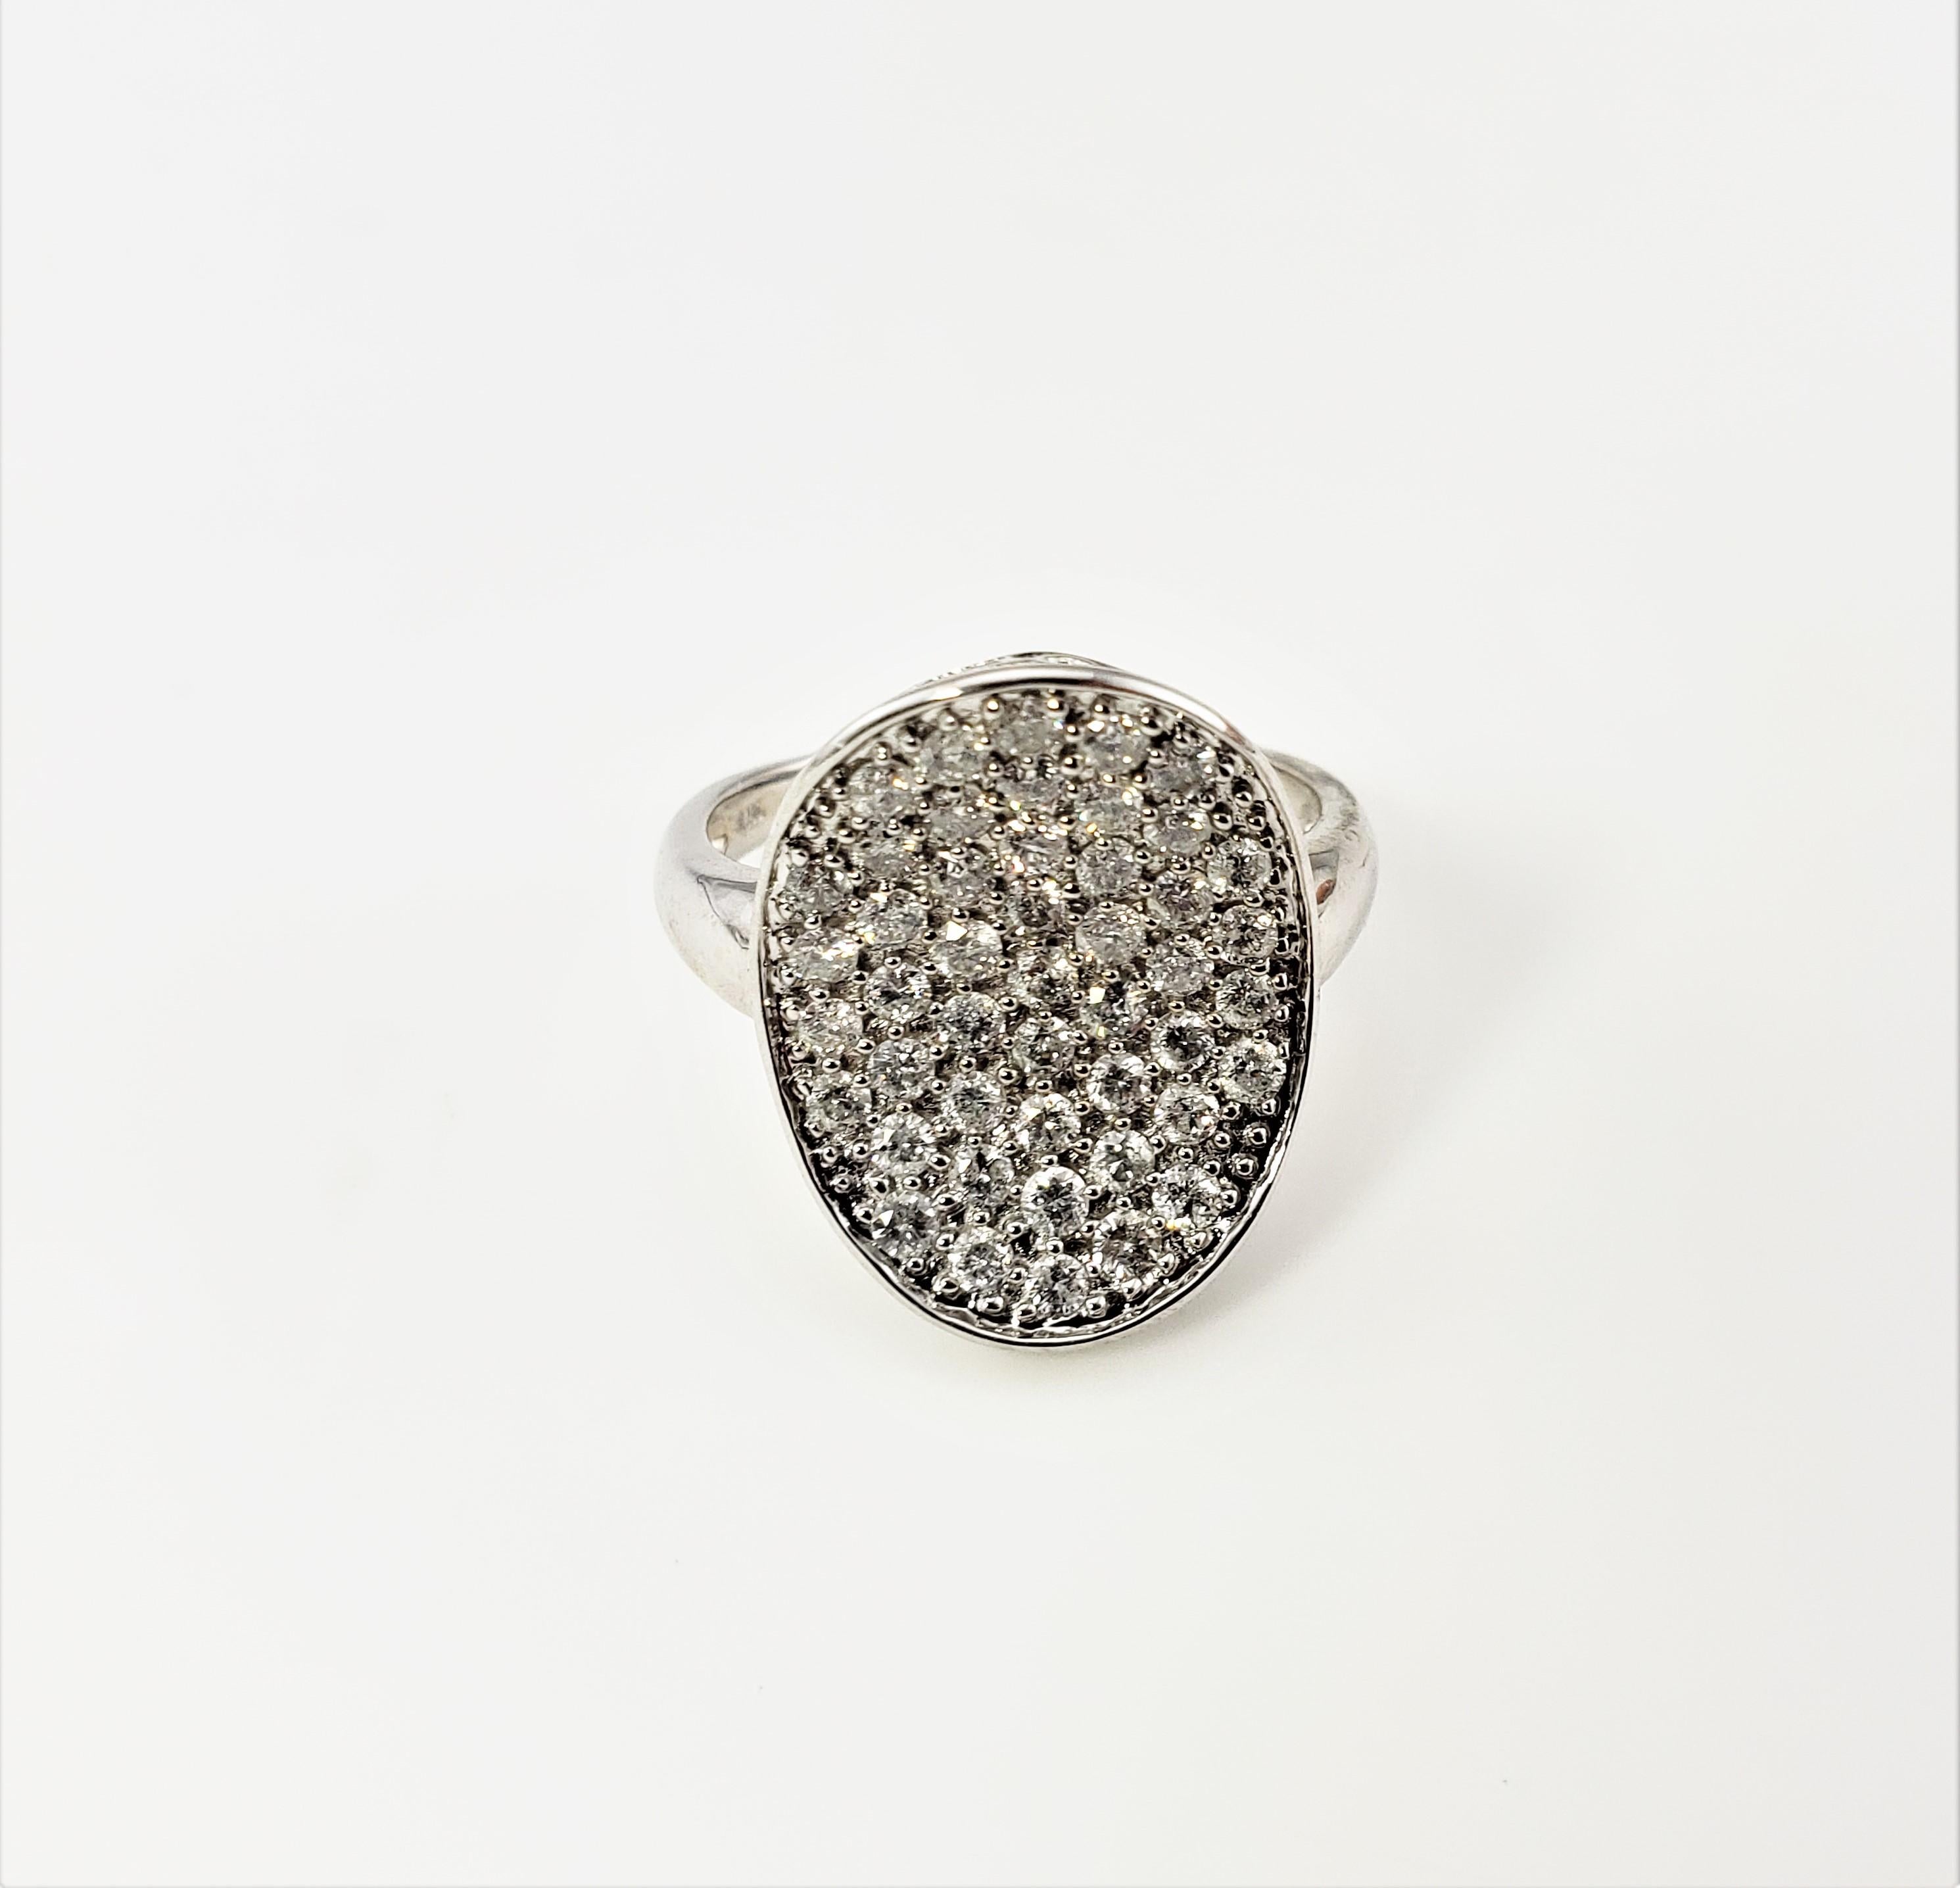 14 Karat White Gold Pave Diamond Ring Size 6.75 GAI Certified-

This sparkling ring features 47 round brilliant cut diamonds set in beautifully detailed 14K white gold.  Top of ring measures                 28 mm x 15 mm.  Shank measures 2